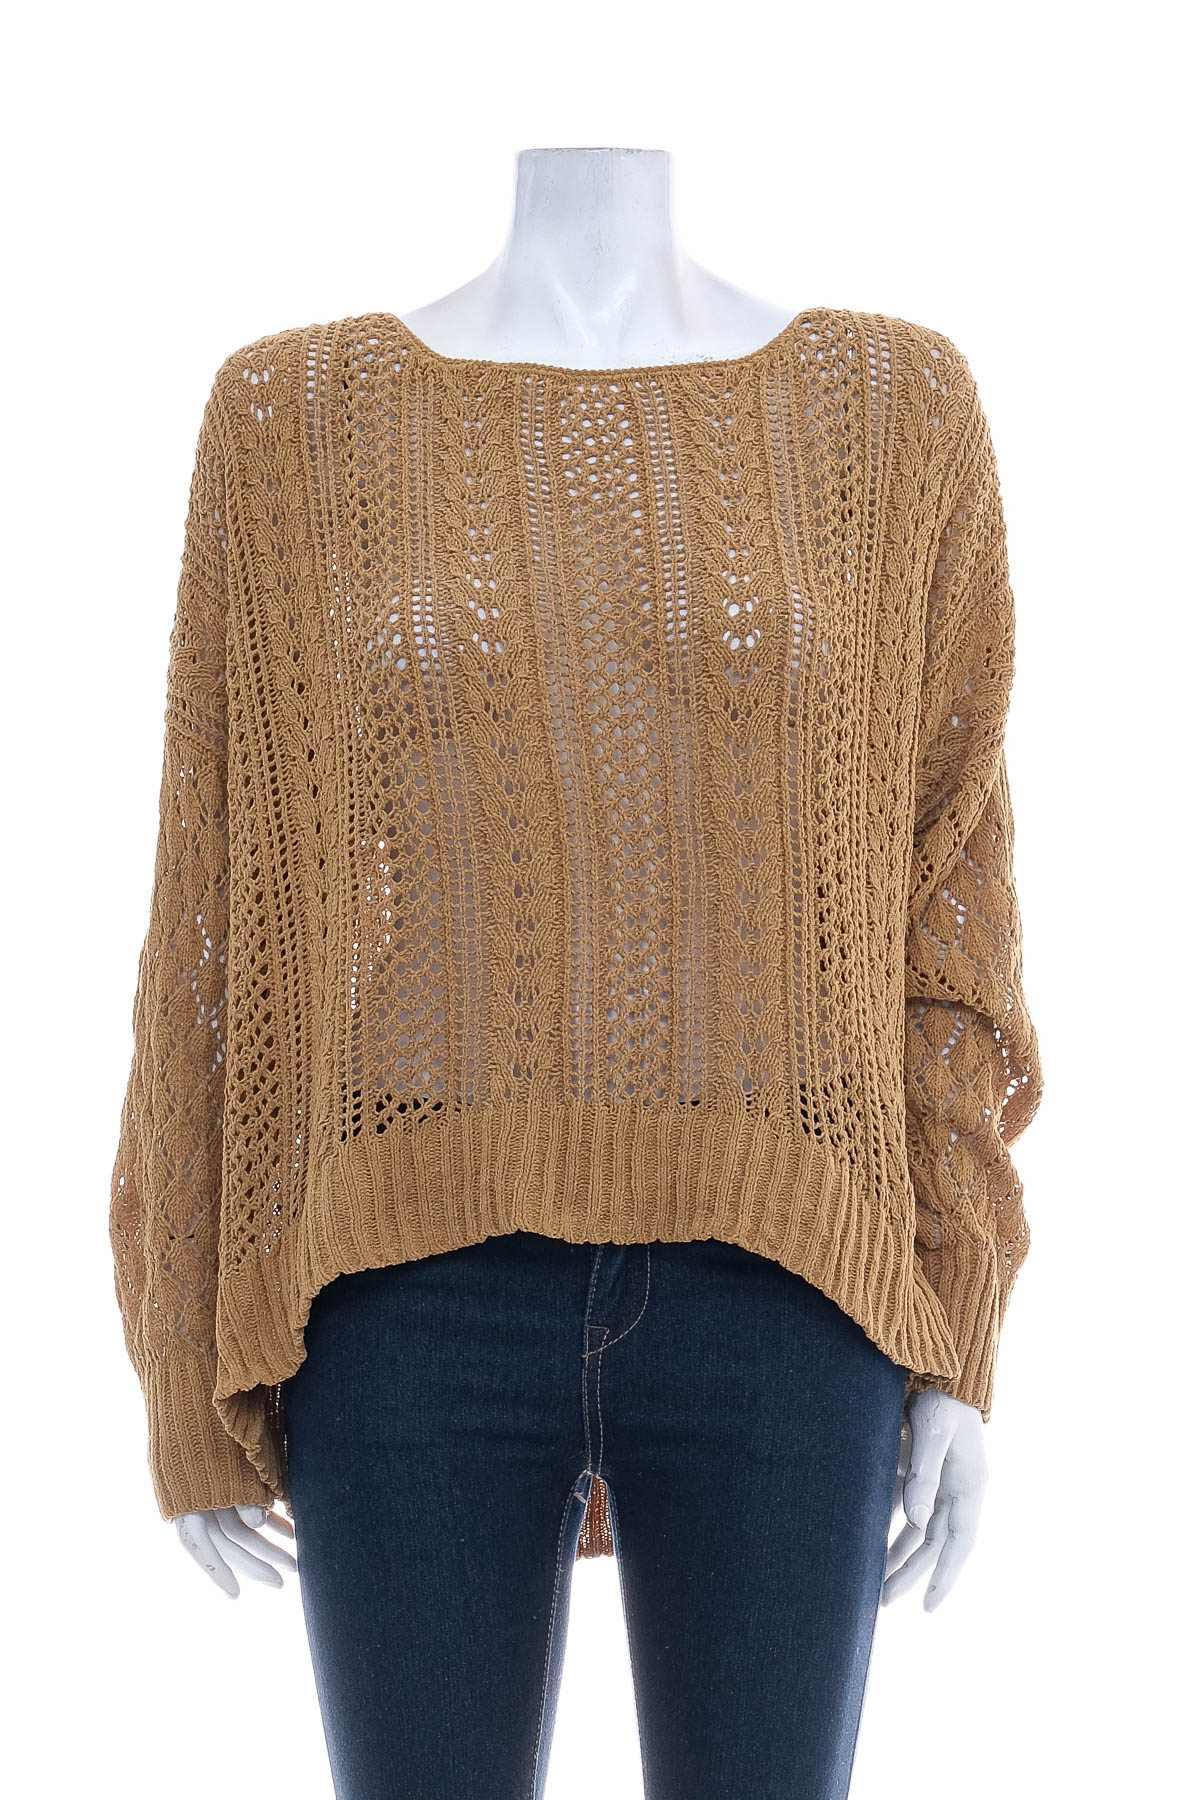 Women's sweater - Maurices - 0